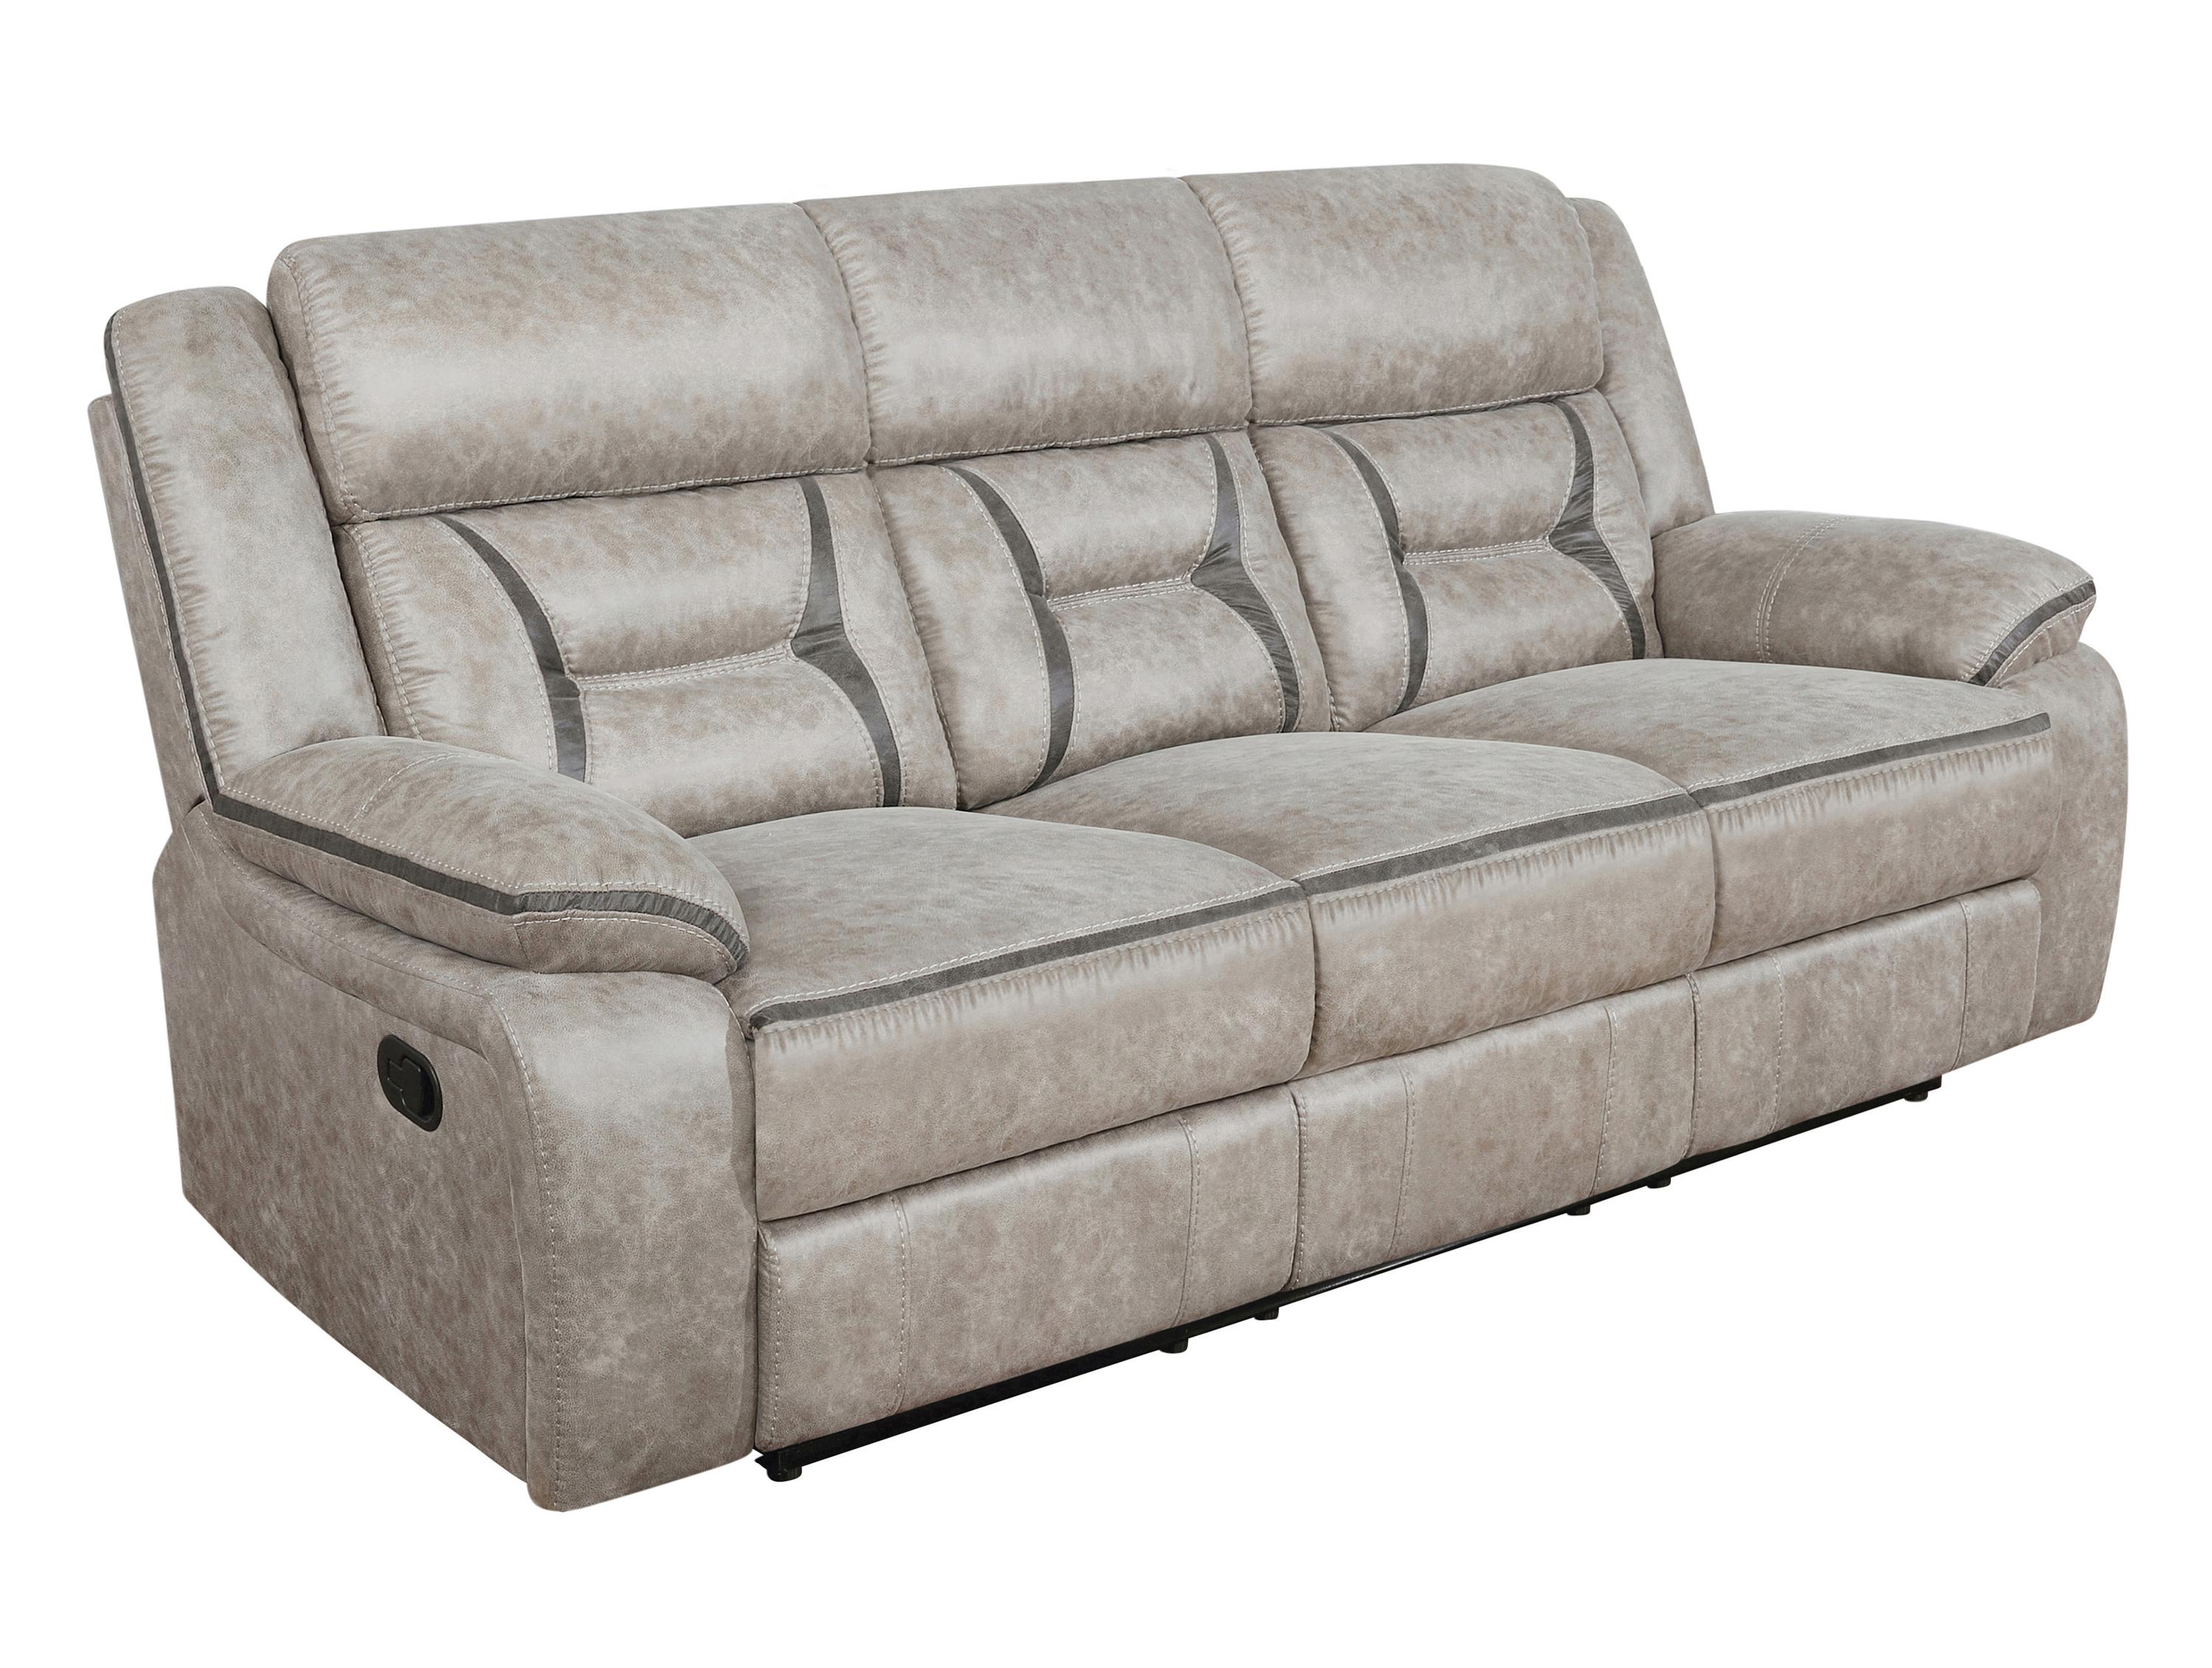 Transitional Motion Sofa 651351 Greer 651351 in Taupe Leatherette